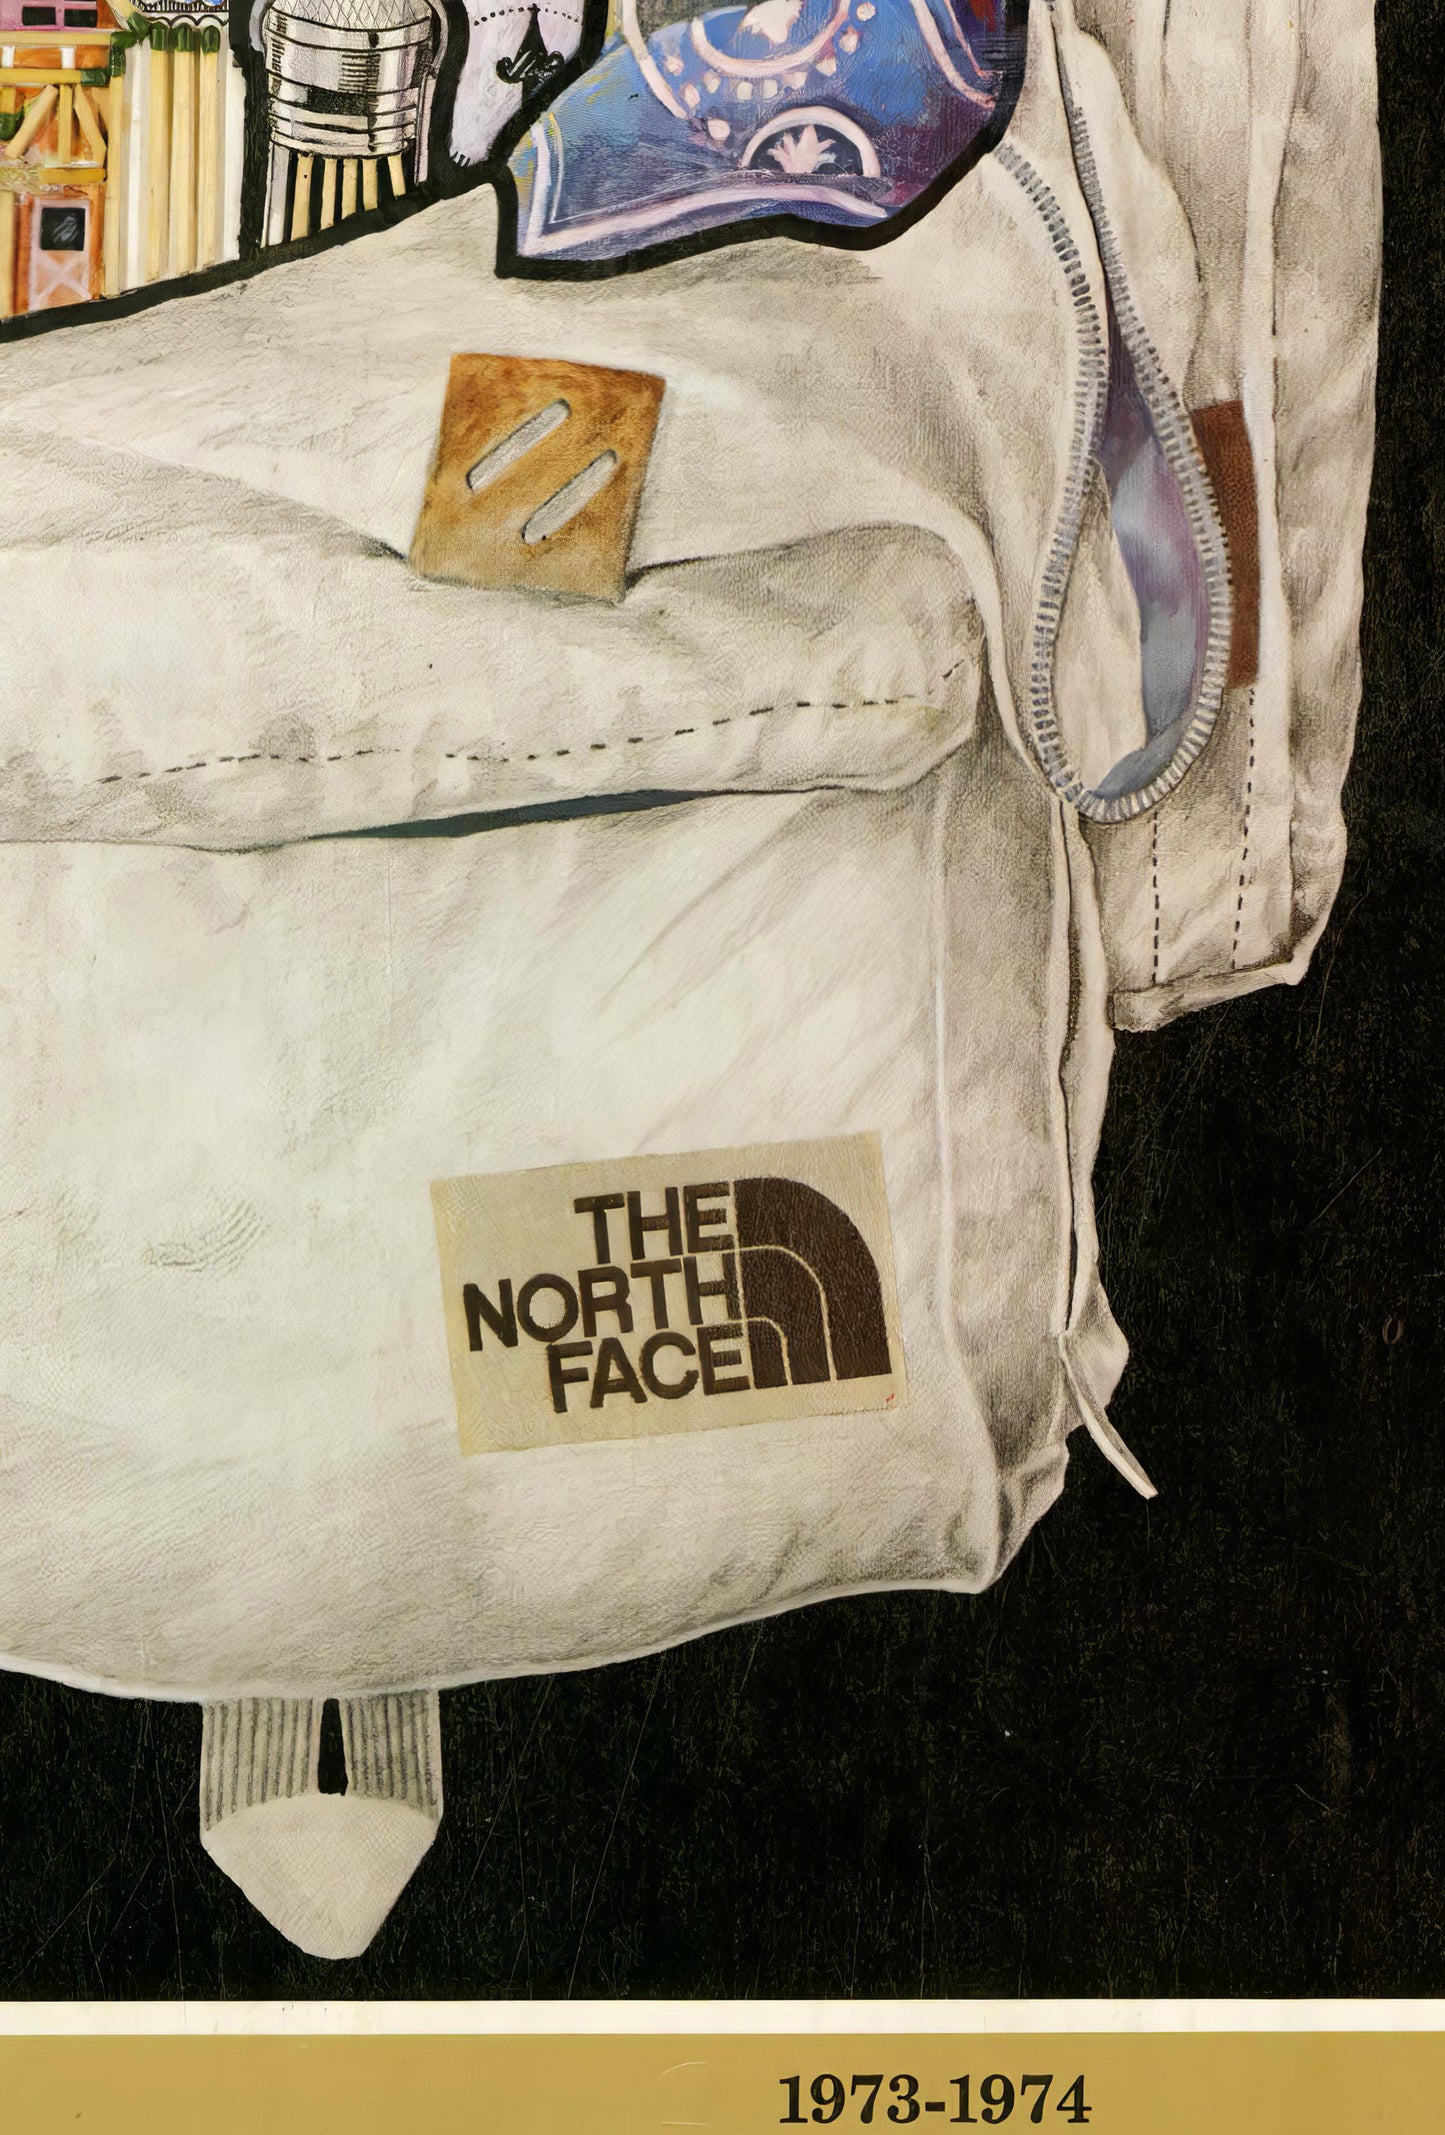 The North Face 1973-1974 Magazine Front Cover Poster